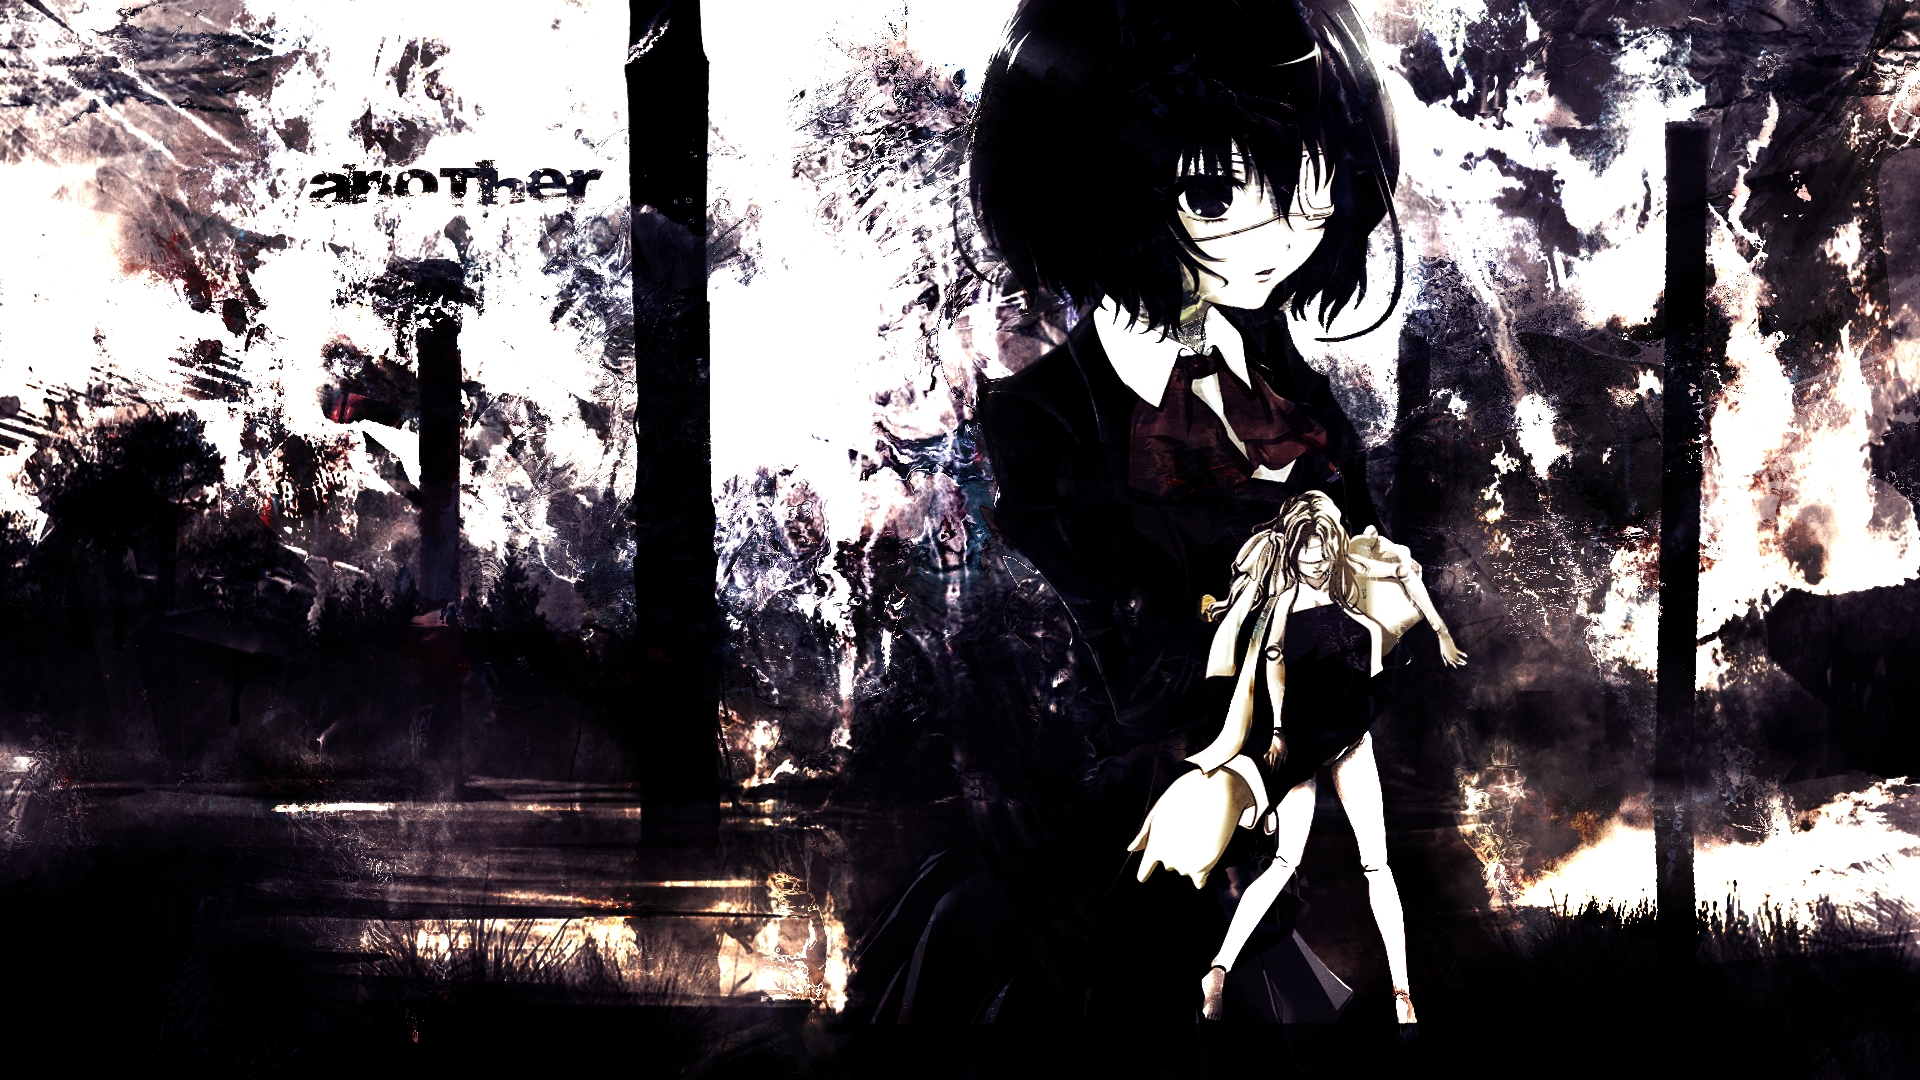 Mei Misaki From Another Wallpaper - Anime Wallpaper Another - HD Wallpaper 